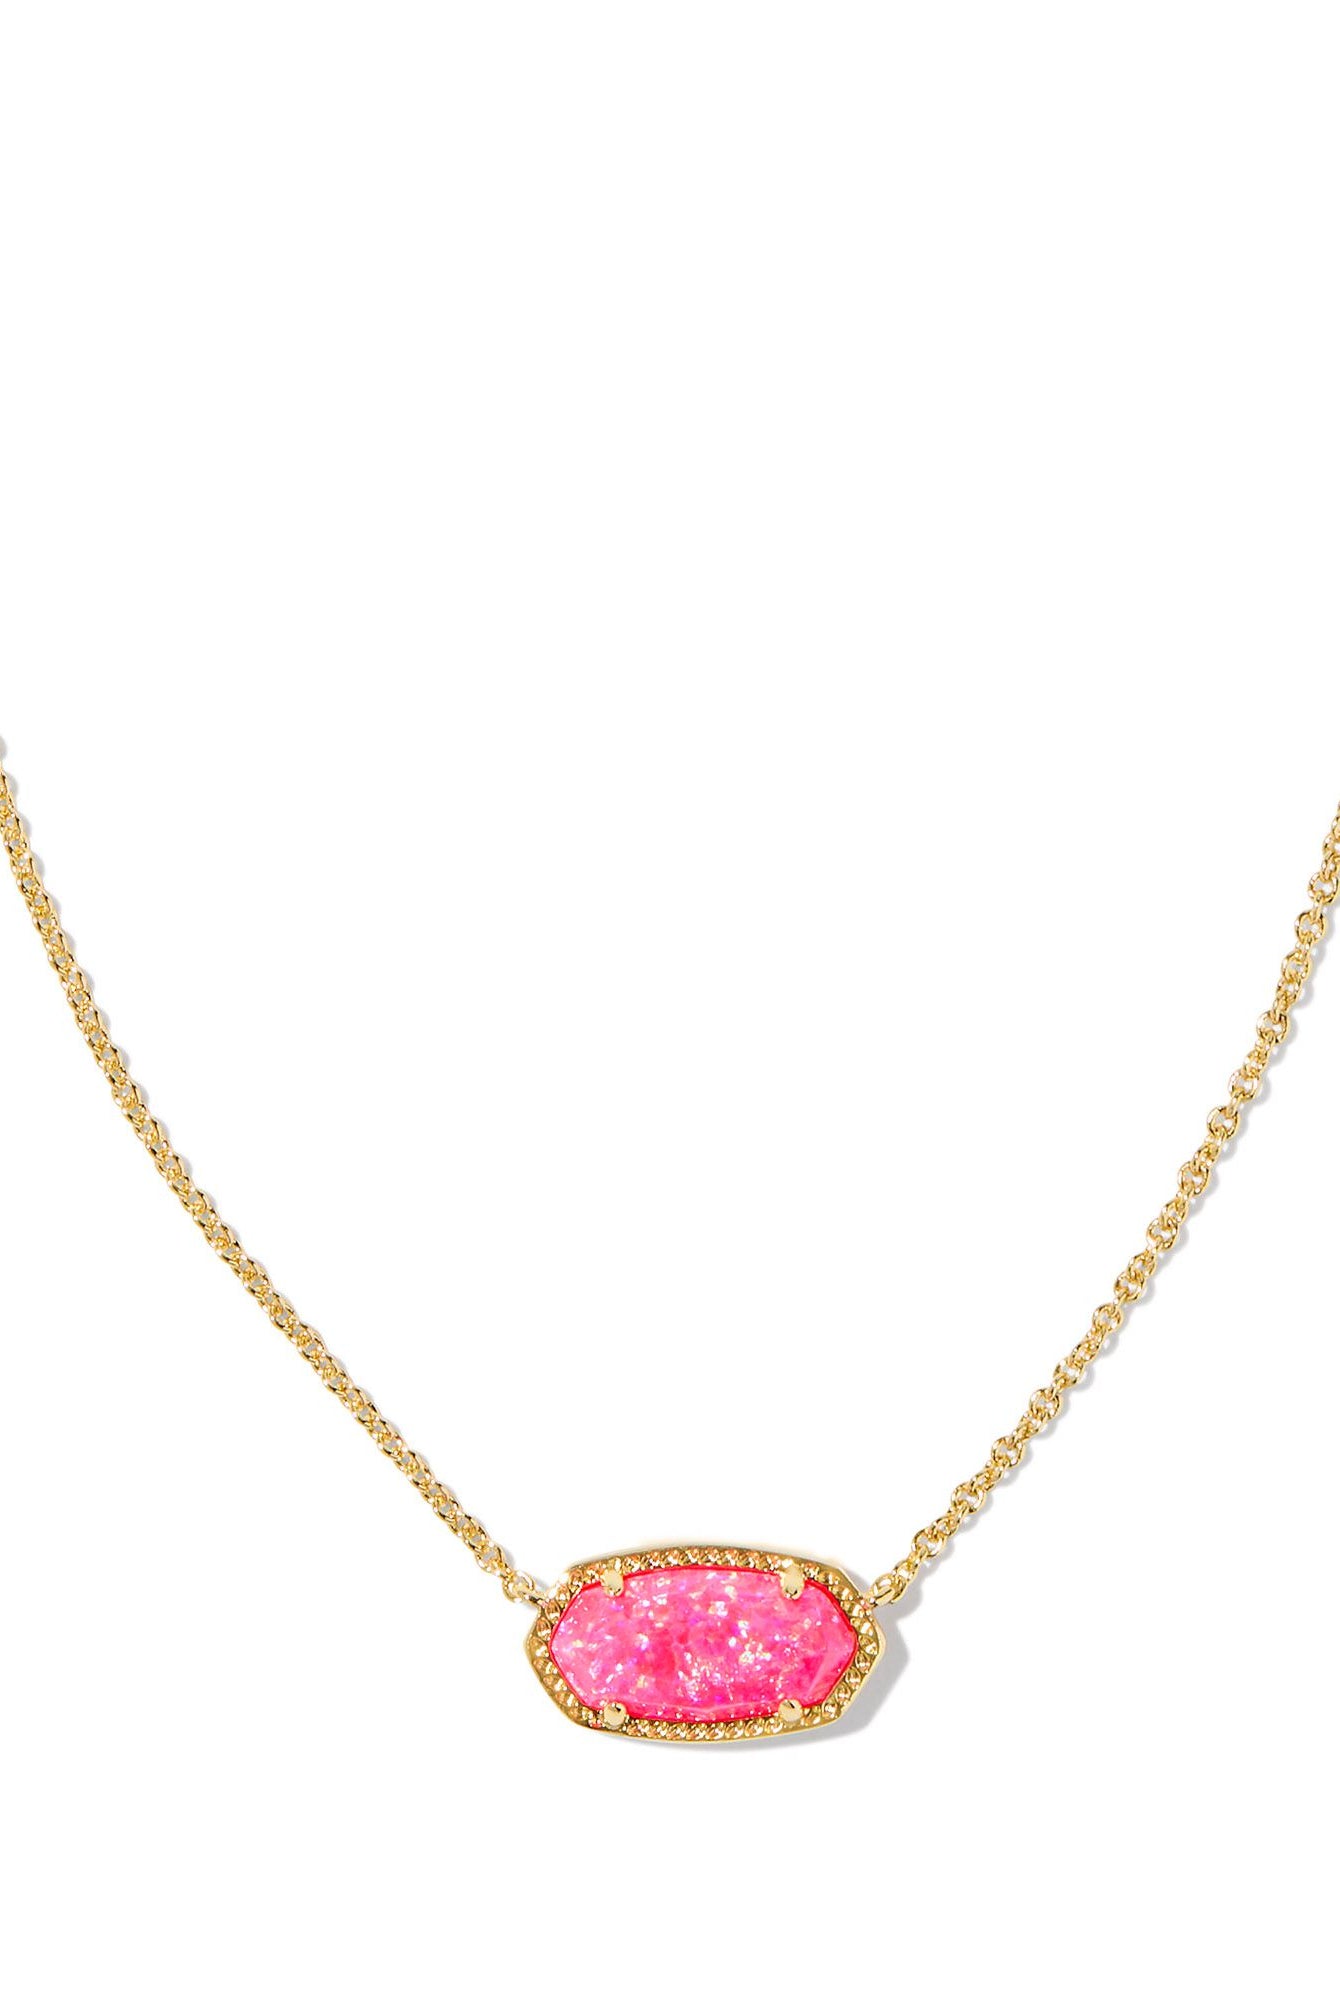 Kendra Scott Elisa Short Pendant Necklace-Necklaces-Vixen Collection, Day Spa and Women's Boutique Located in Seattle, Washington